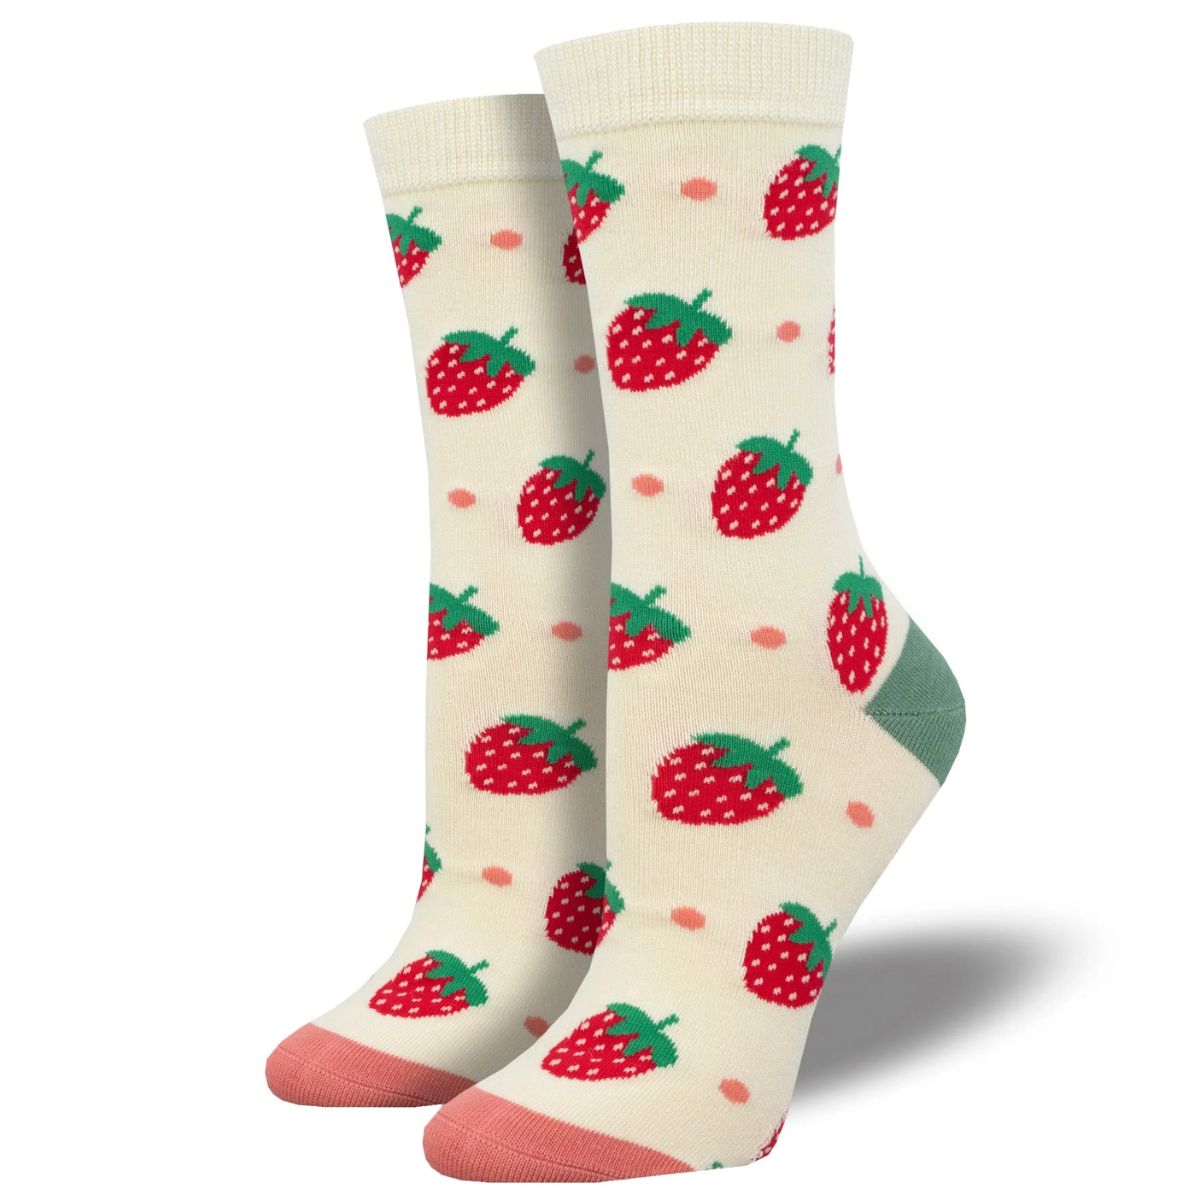 Strawberry delight socks a pair of ivory white socks with strawberry print. 